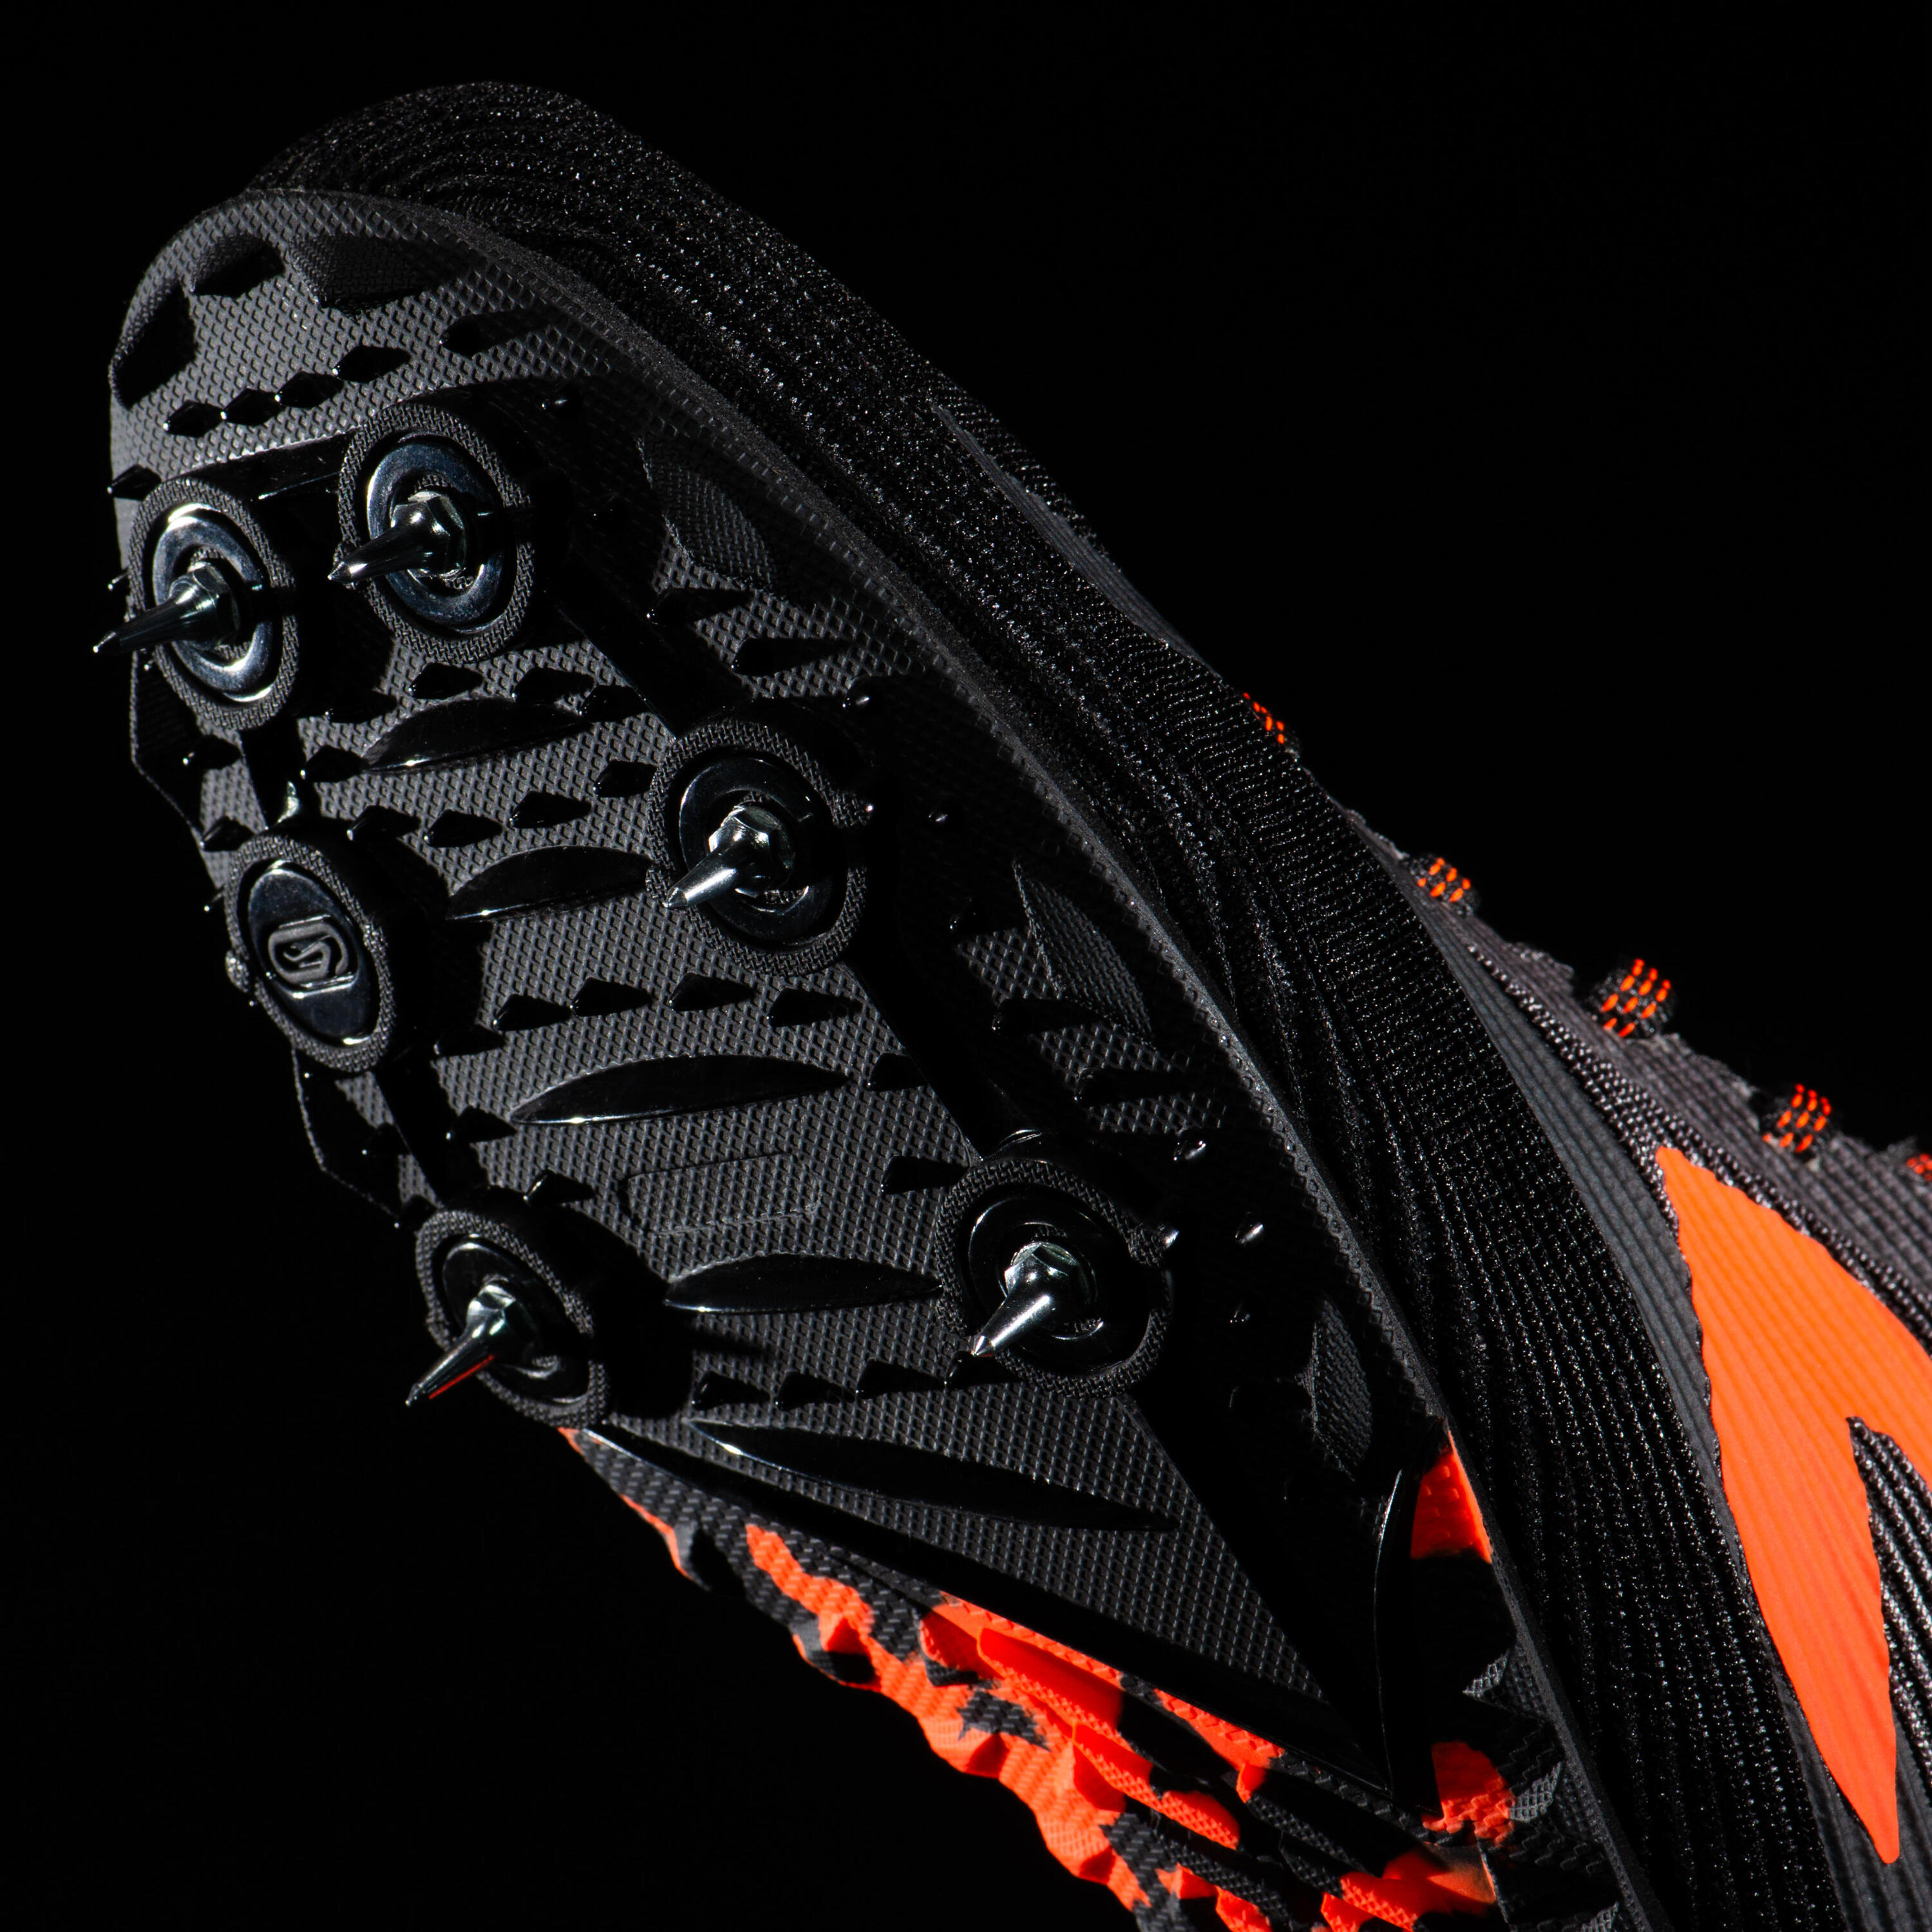 ATHLETICS CROSS-COUNTRY SHOES WITH SPIKES - BLACK/ORANGE 3/8